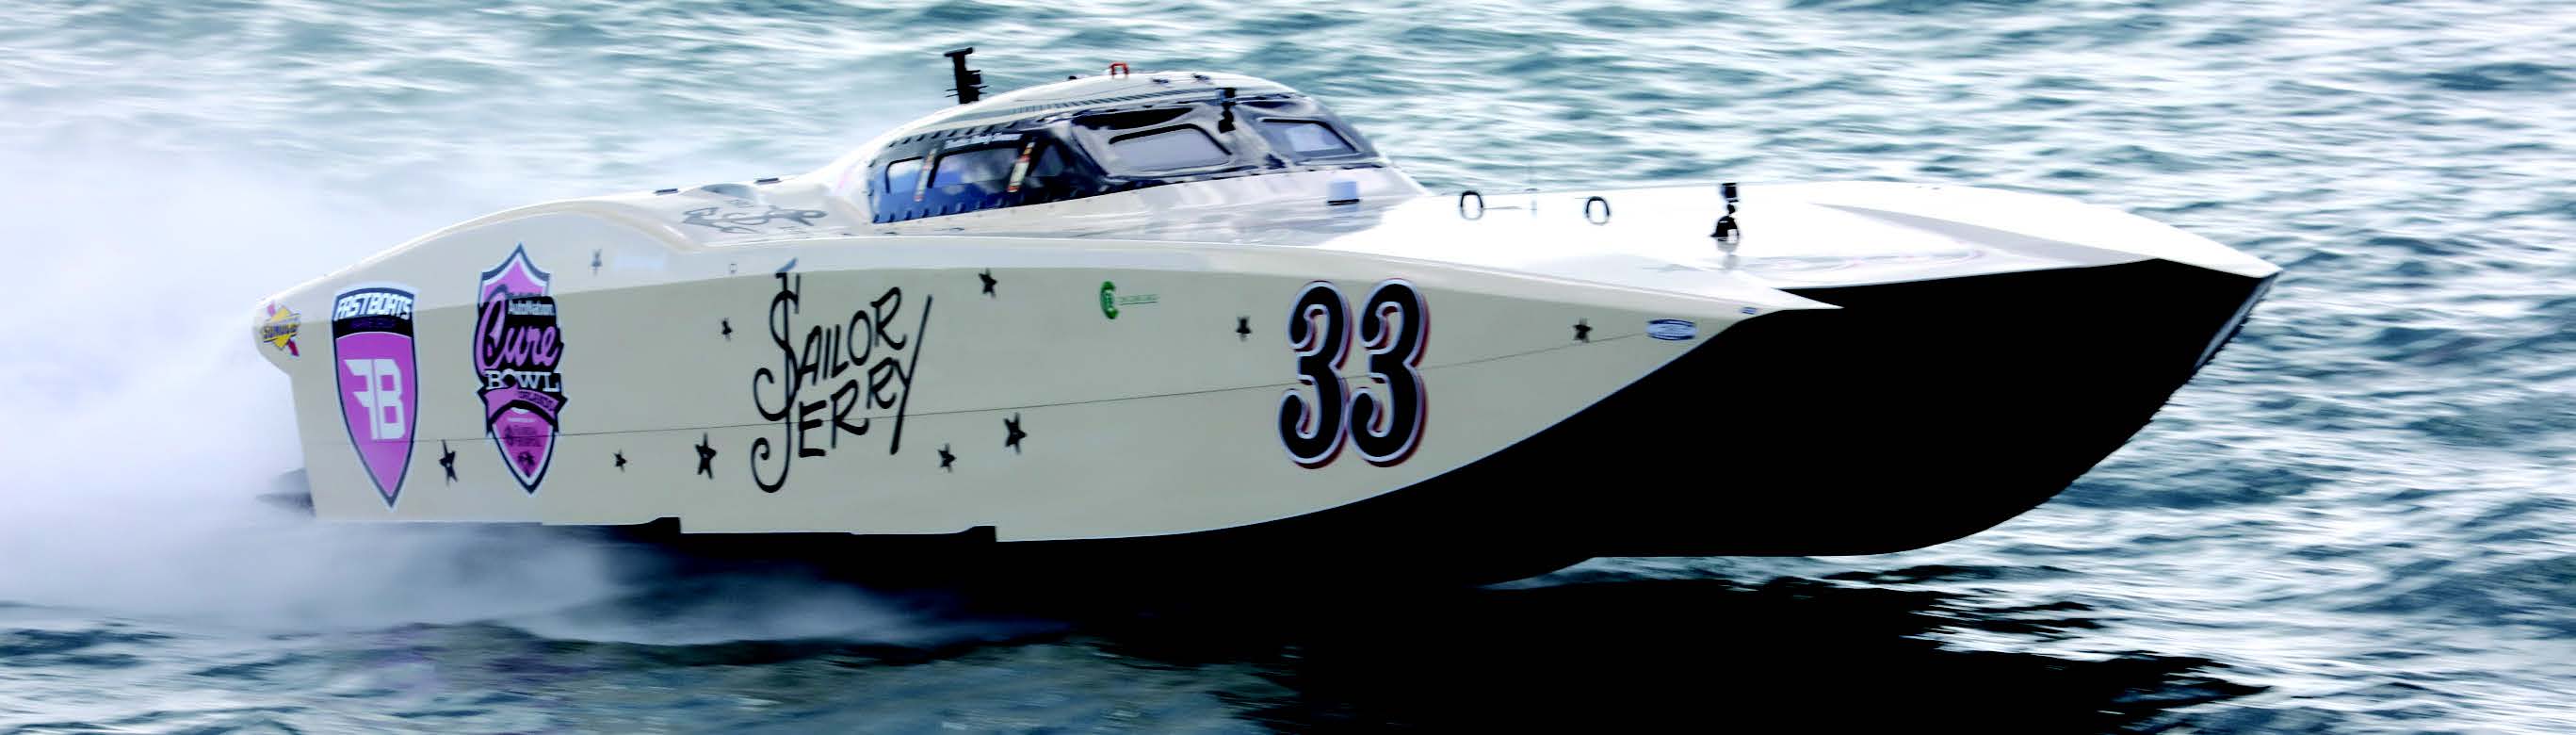 With new graphics and a new driver, the Sailor Jerry-Autonation team is running the only MTI in Superboat.